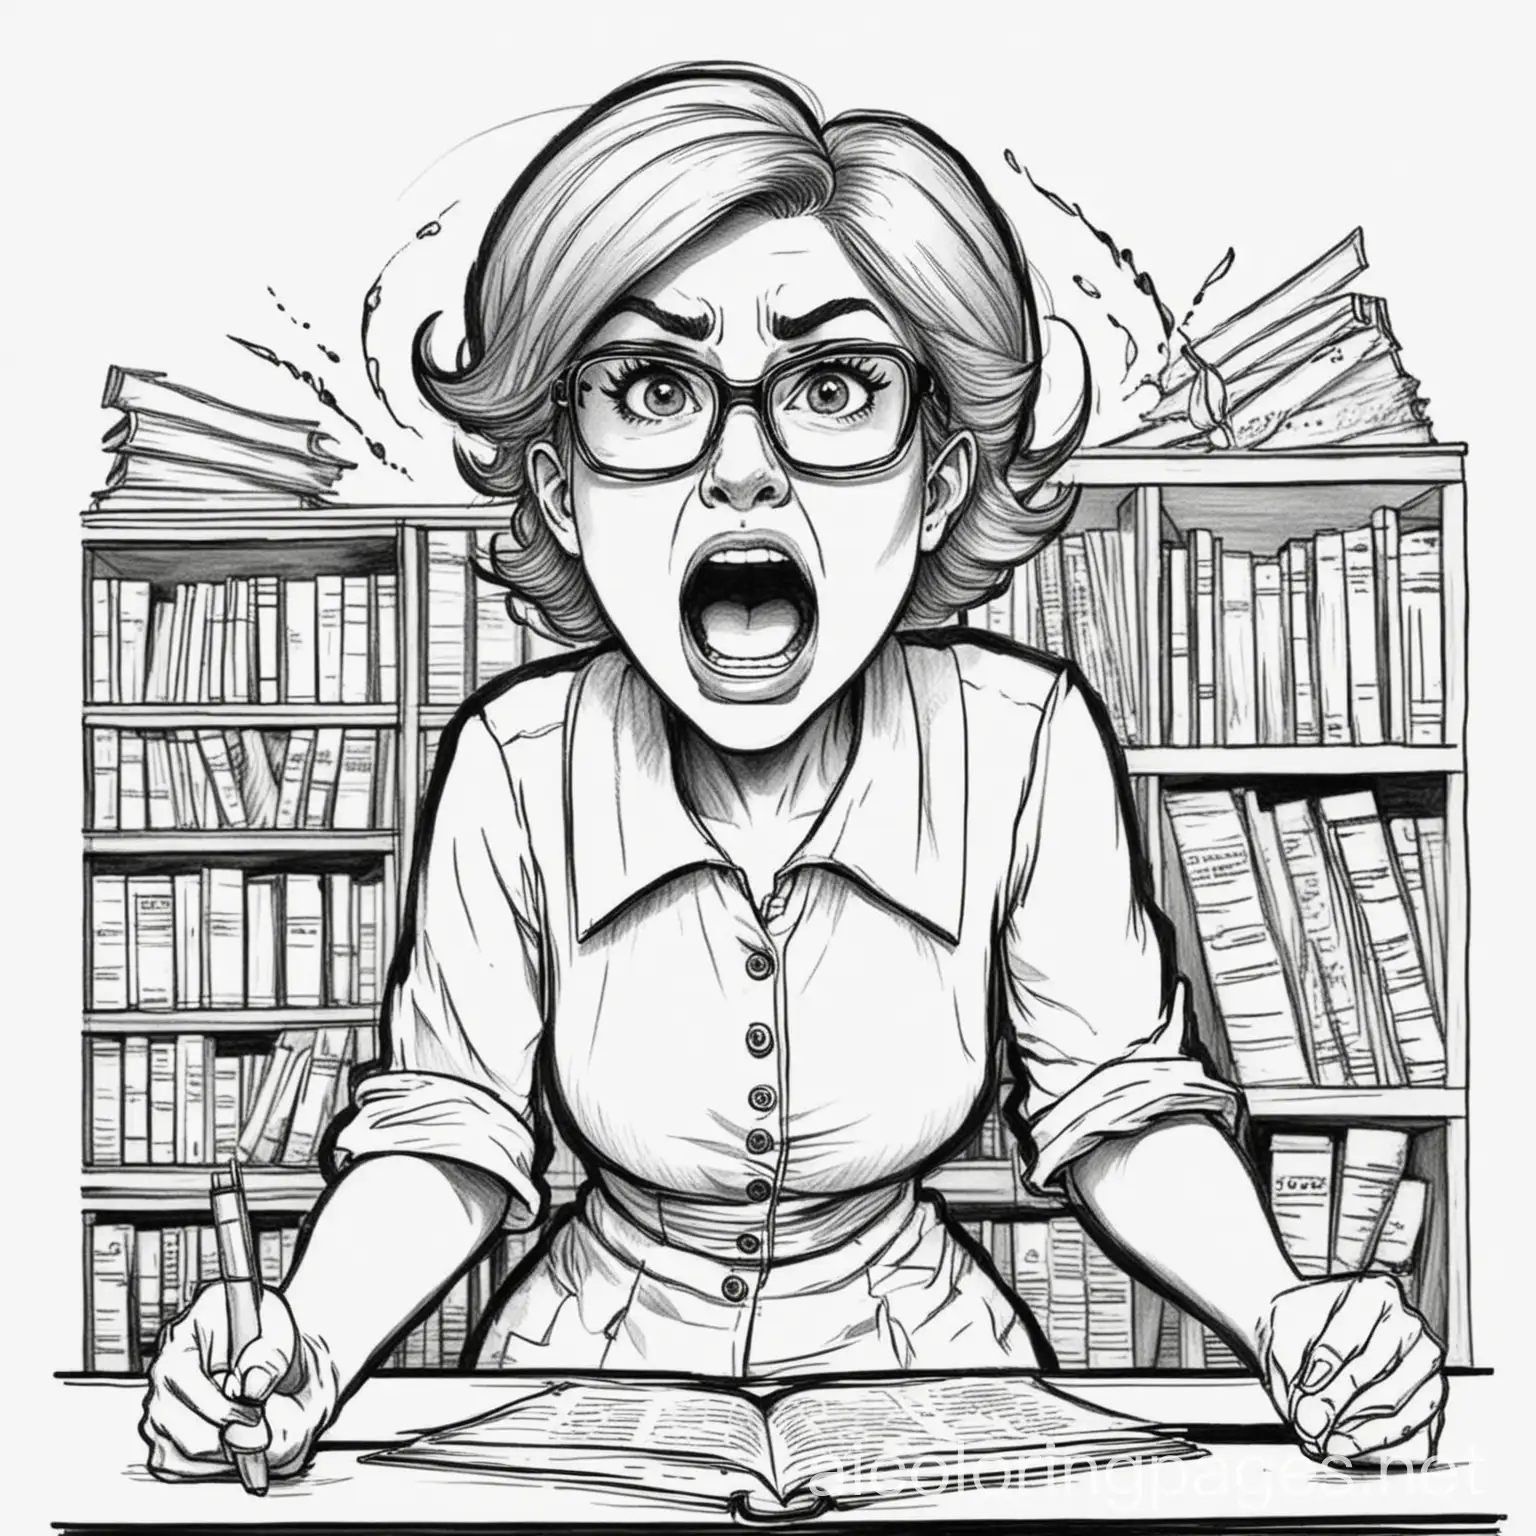 an angry librarian screaming, Coloring Page, black and white, line art, white background, Simplicity, Ample White Space. The background of the coloring page is plain white to make it easy for young children to color within the lines. The outlines of all the subjects are easy to distinguish, making it simple for kids to color without too much difficulty